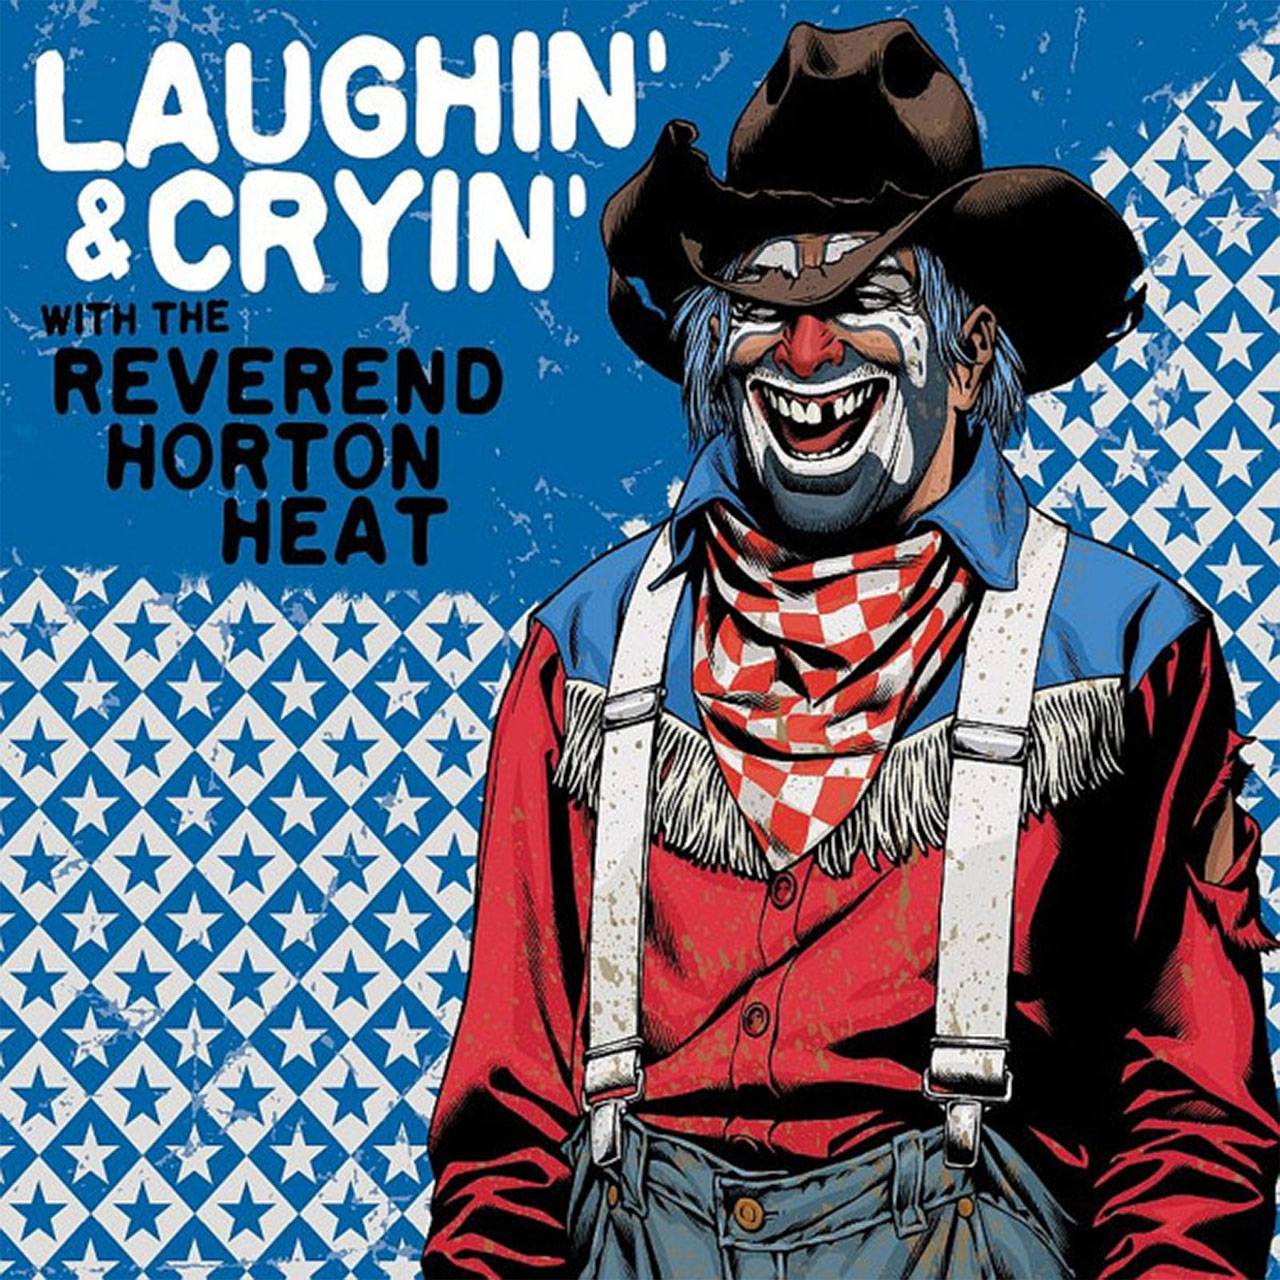 Laughin’ & Cryin’ With The Reverend Horton Heat